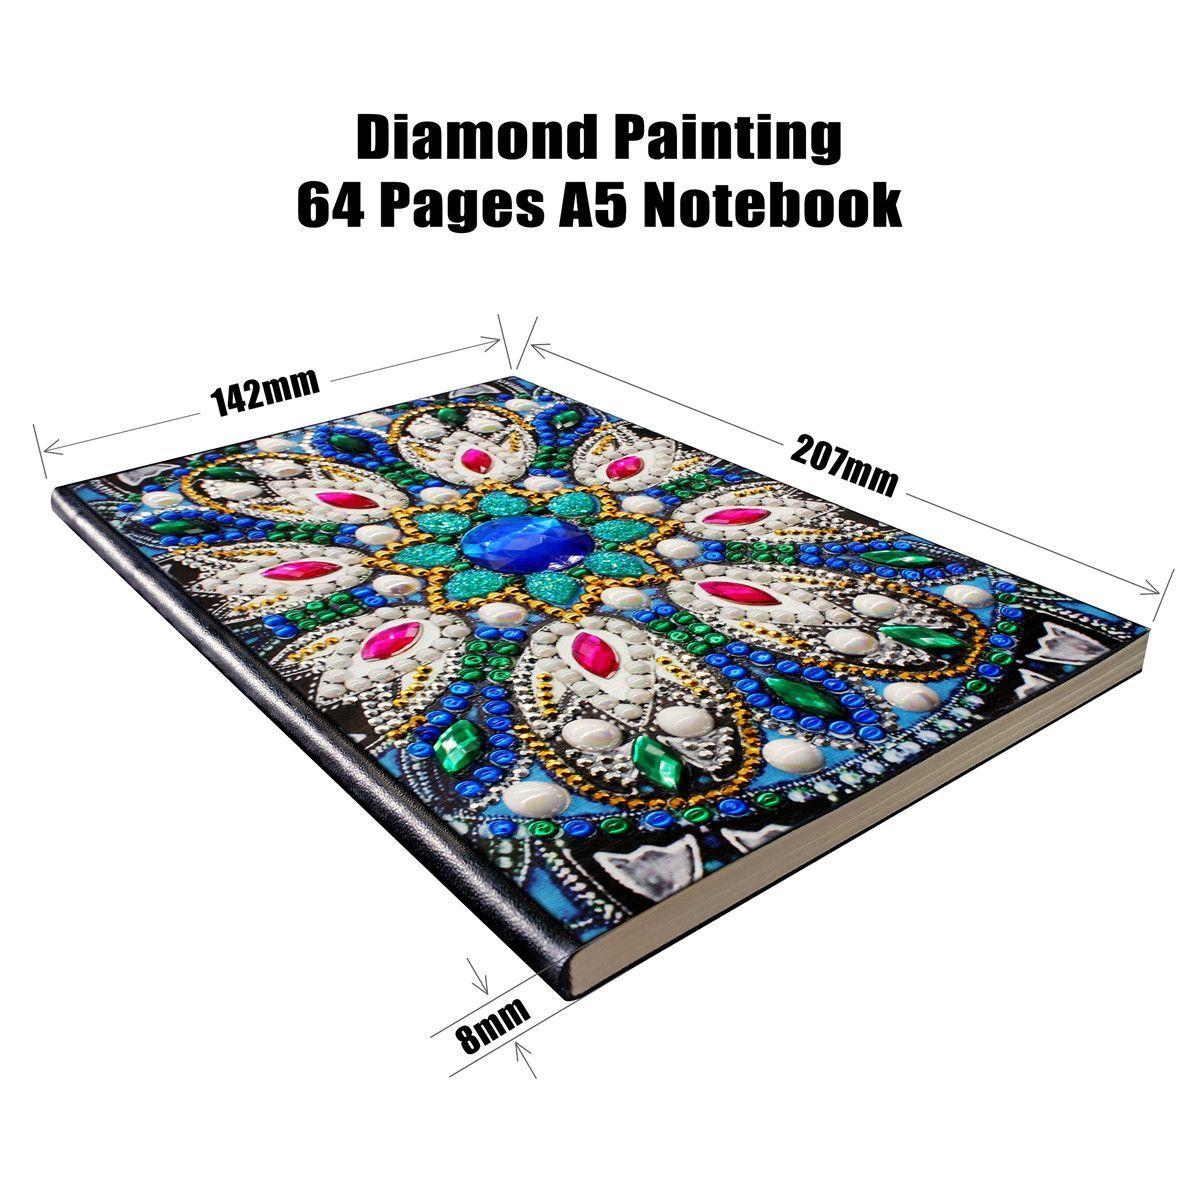 DIY-Diamond-Painting-Special-Shape-Diary-Book-Diamond-Decorations-A5-Notebook-Embroidery-kits-1561135